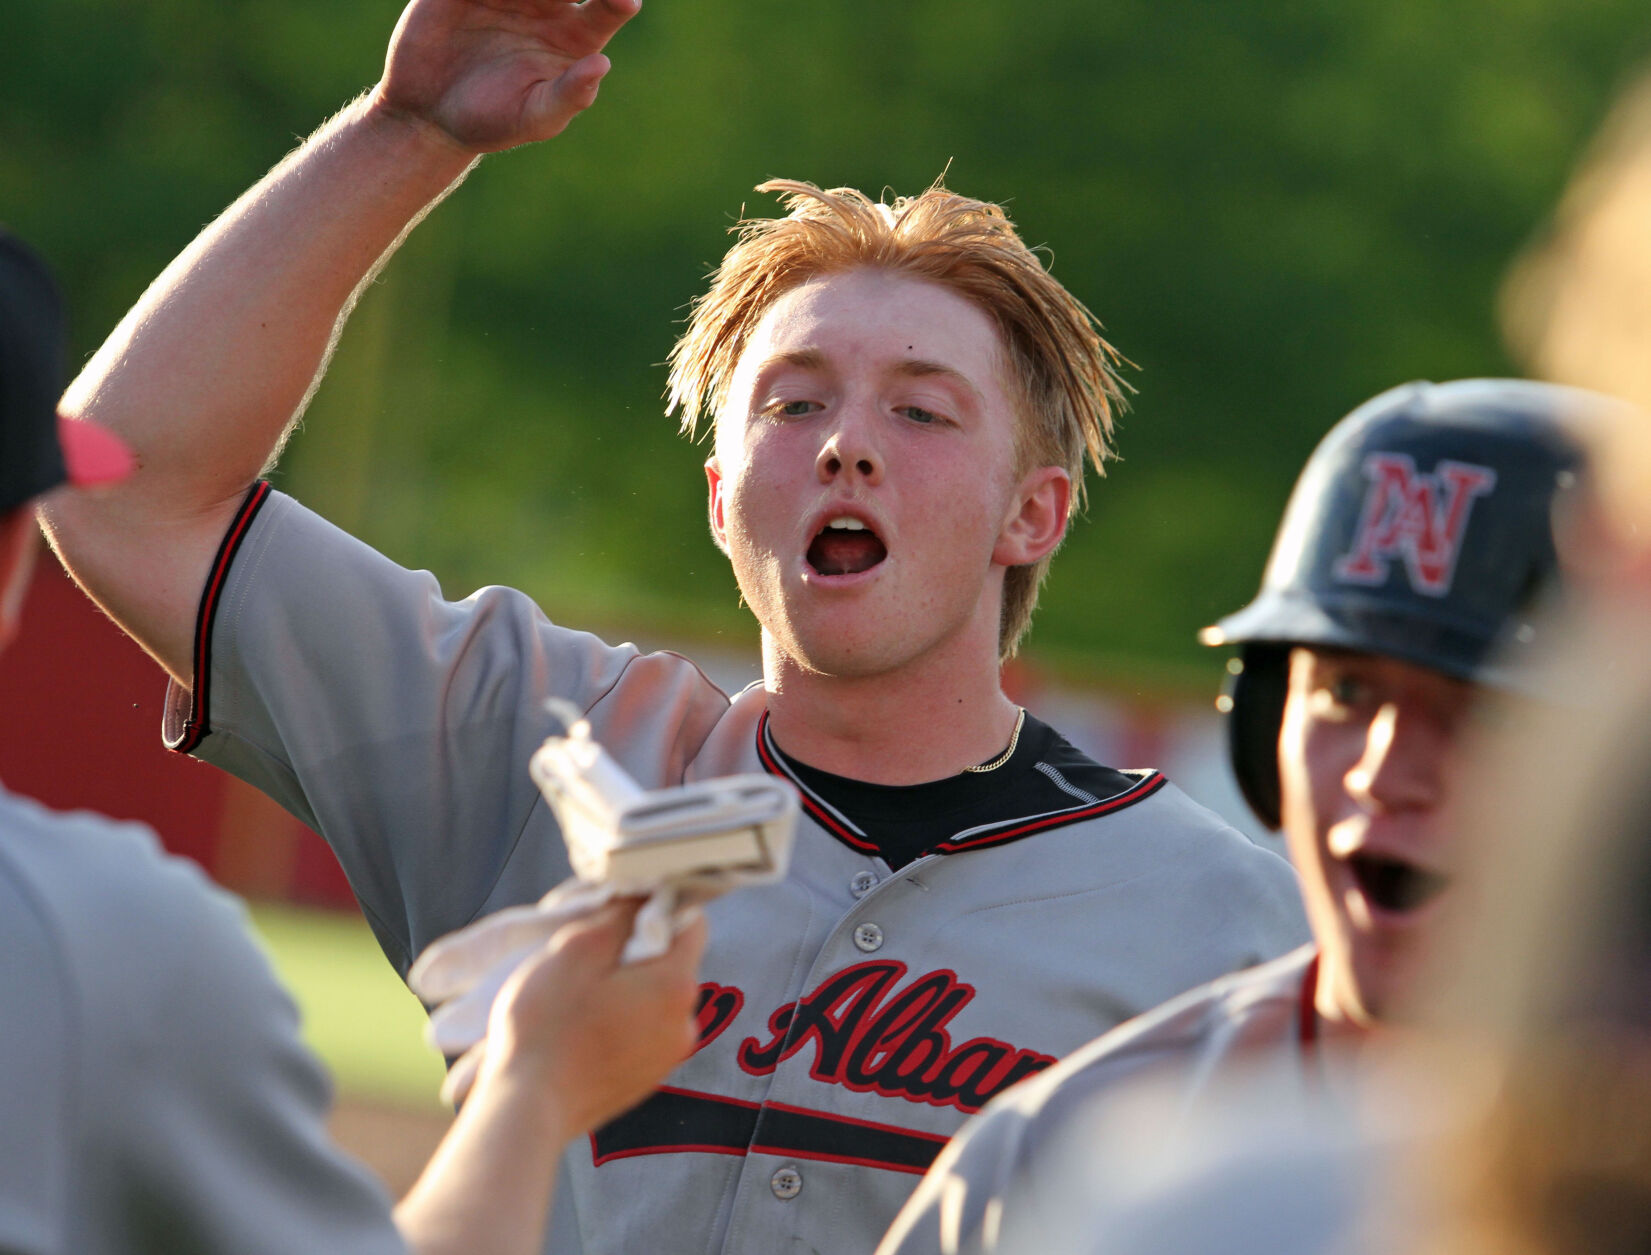 New Albany Bulldogs Top Jeffersonville Red Devils in Extra-Inning Thriller